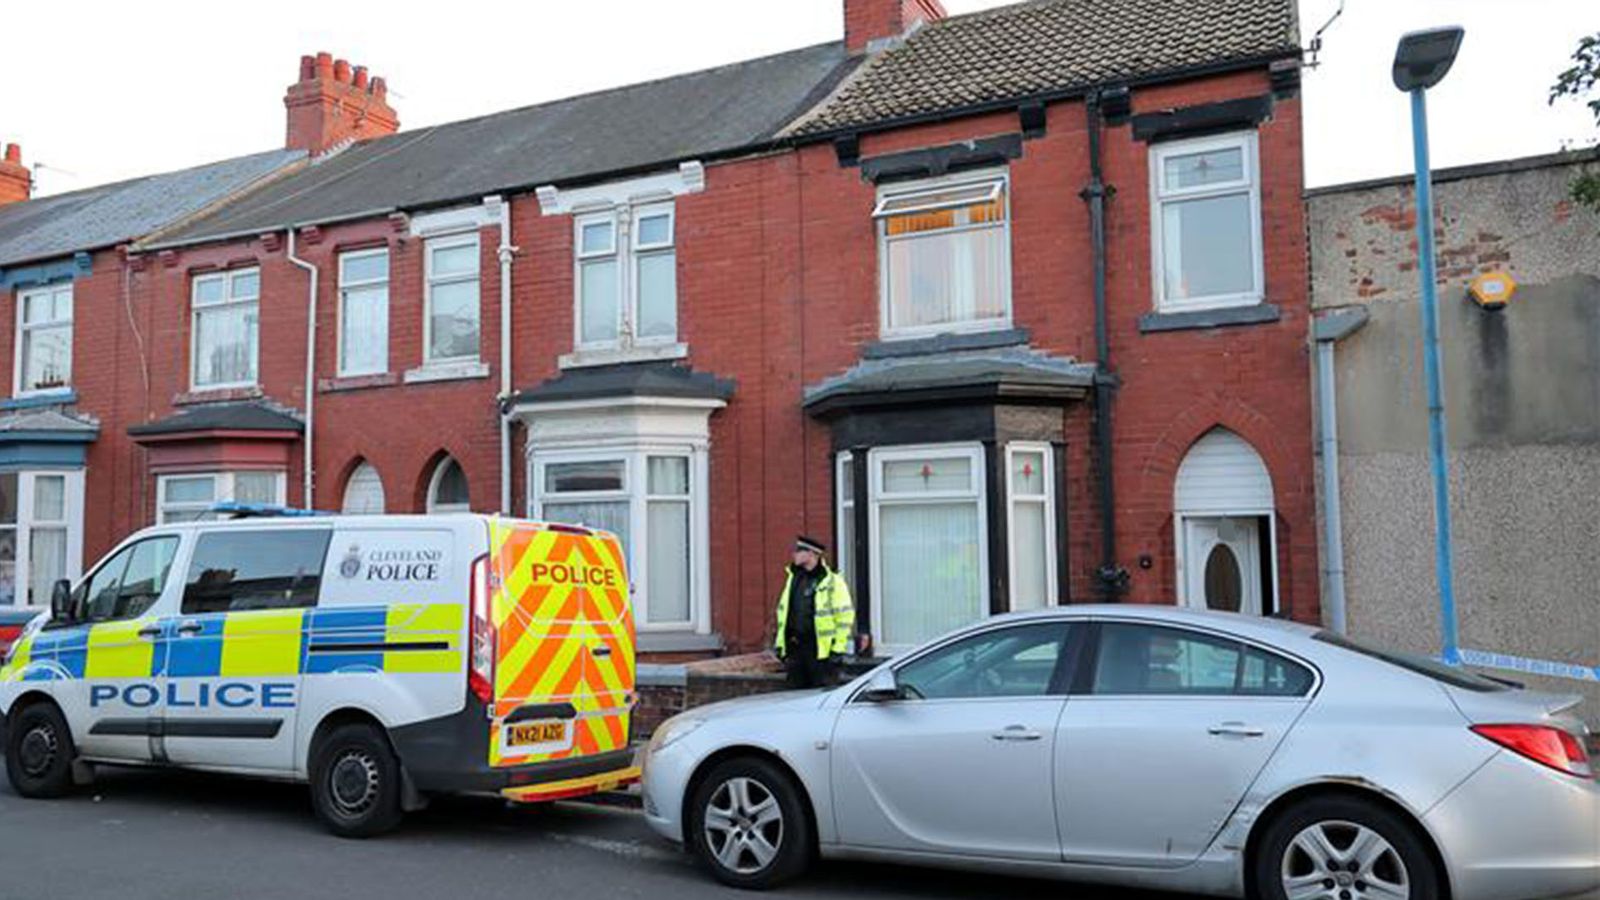 Man Arrested in Hartlepool Amid Counter Terrorism Investigation